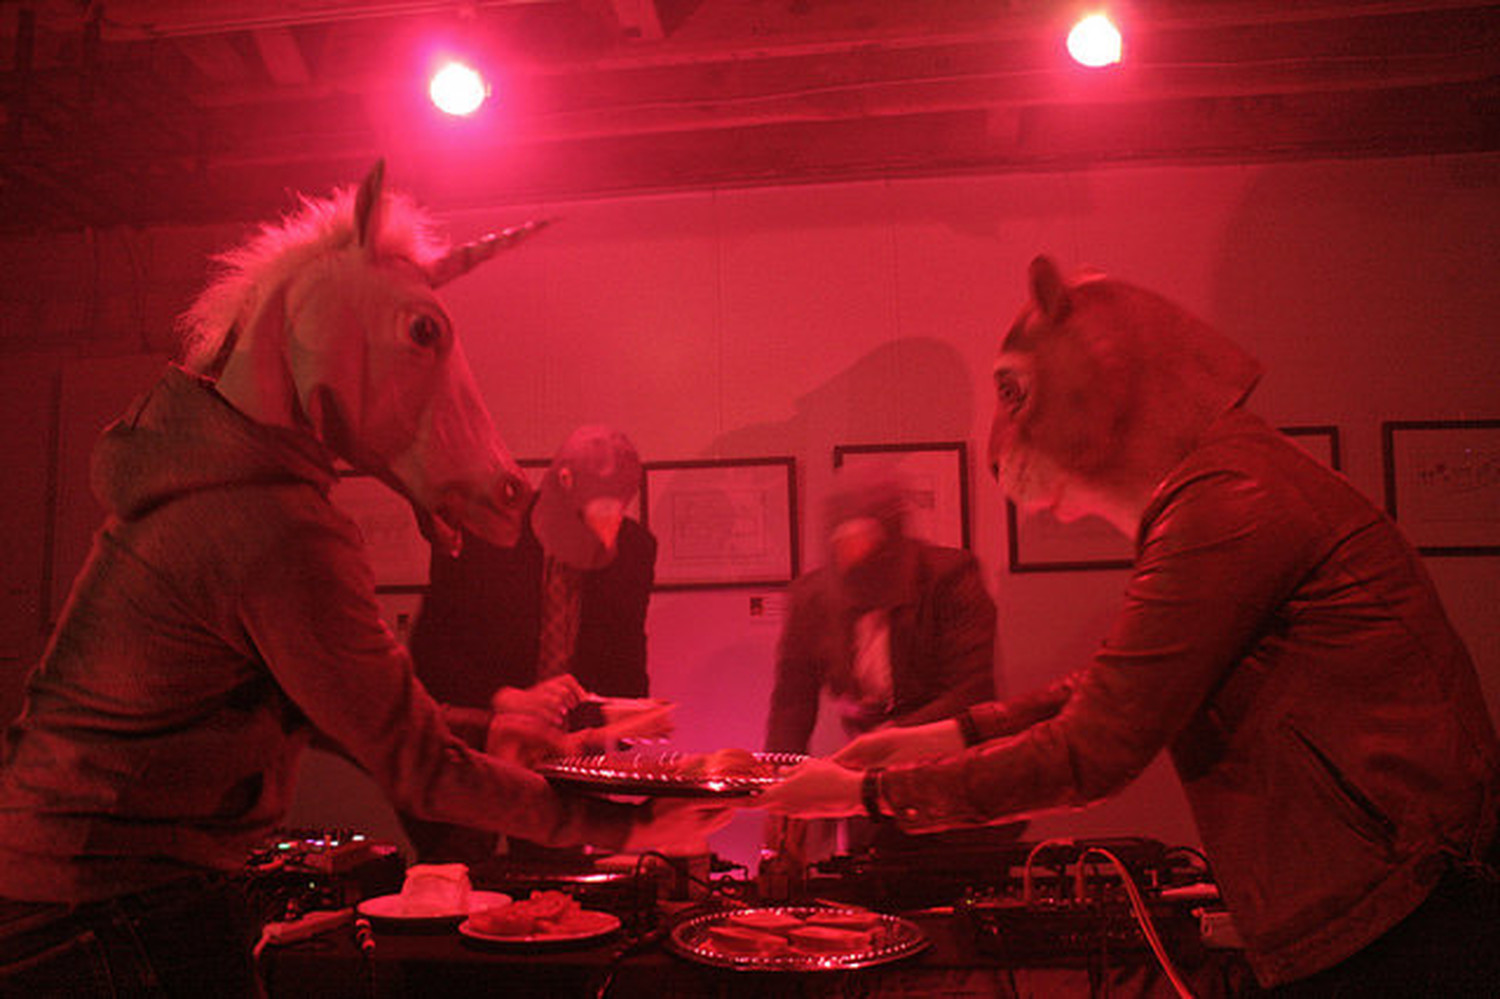 4 people in animal masks playing turn tables and passing food